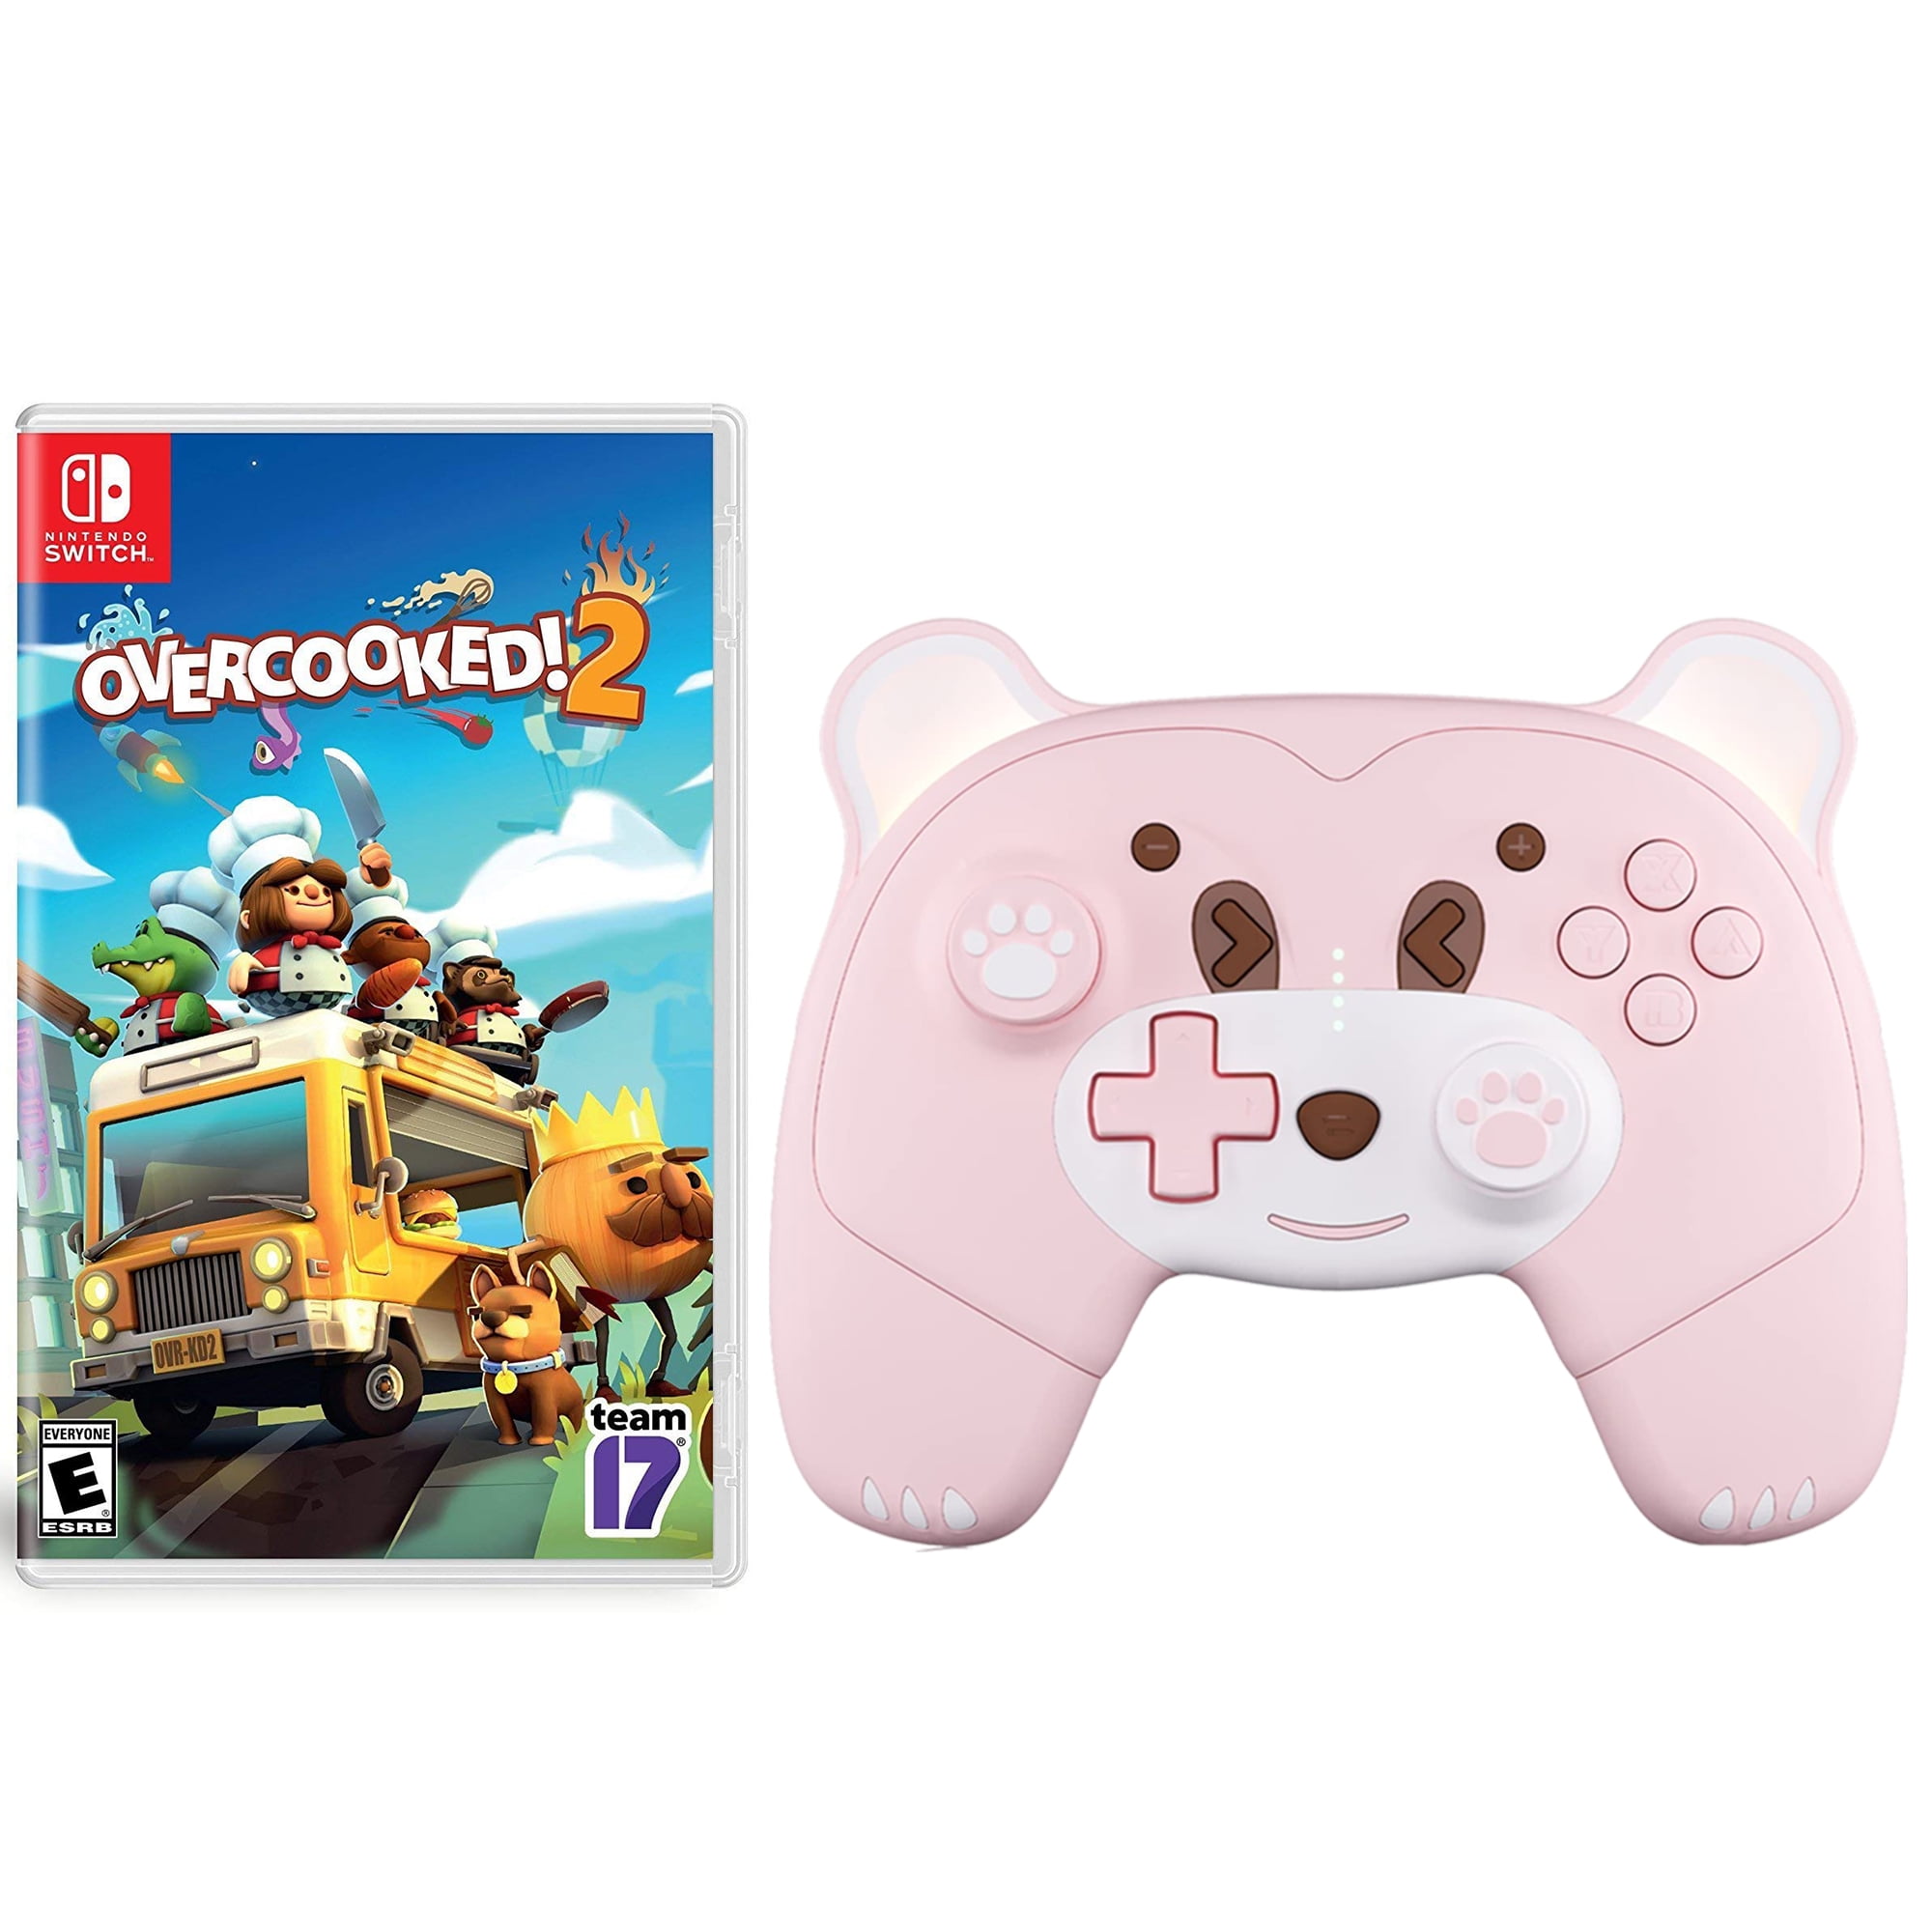 Overcooked! + Overcooked! 2 Game Disc and Upgraded Wireless Switch 